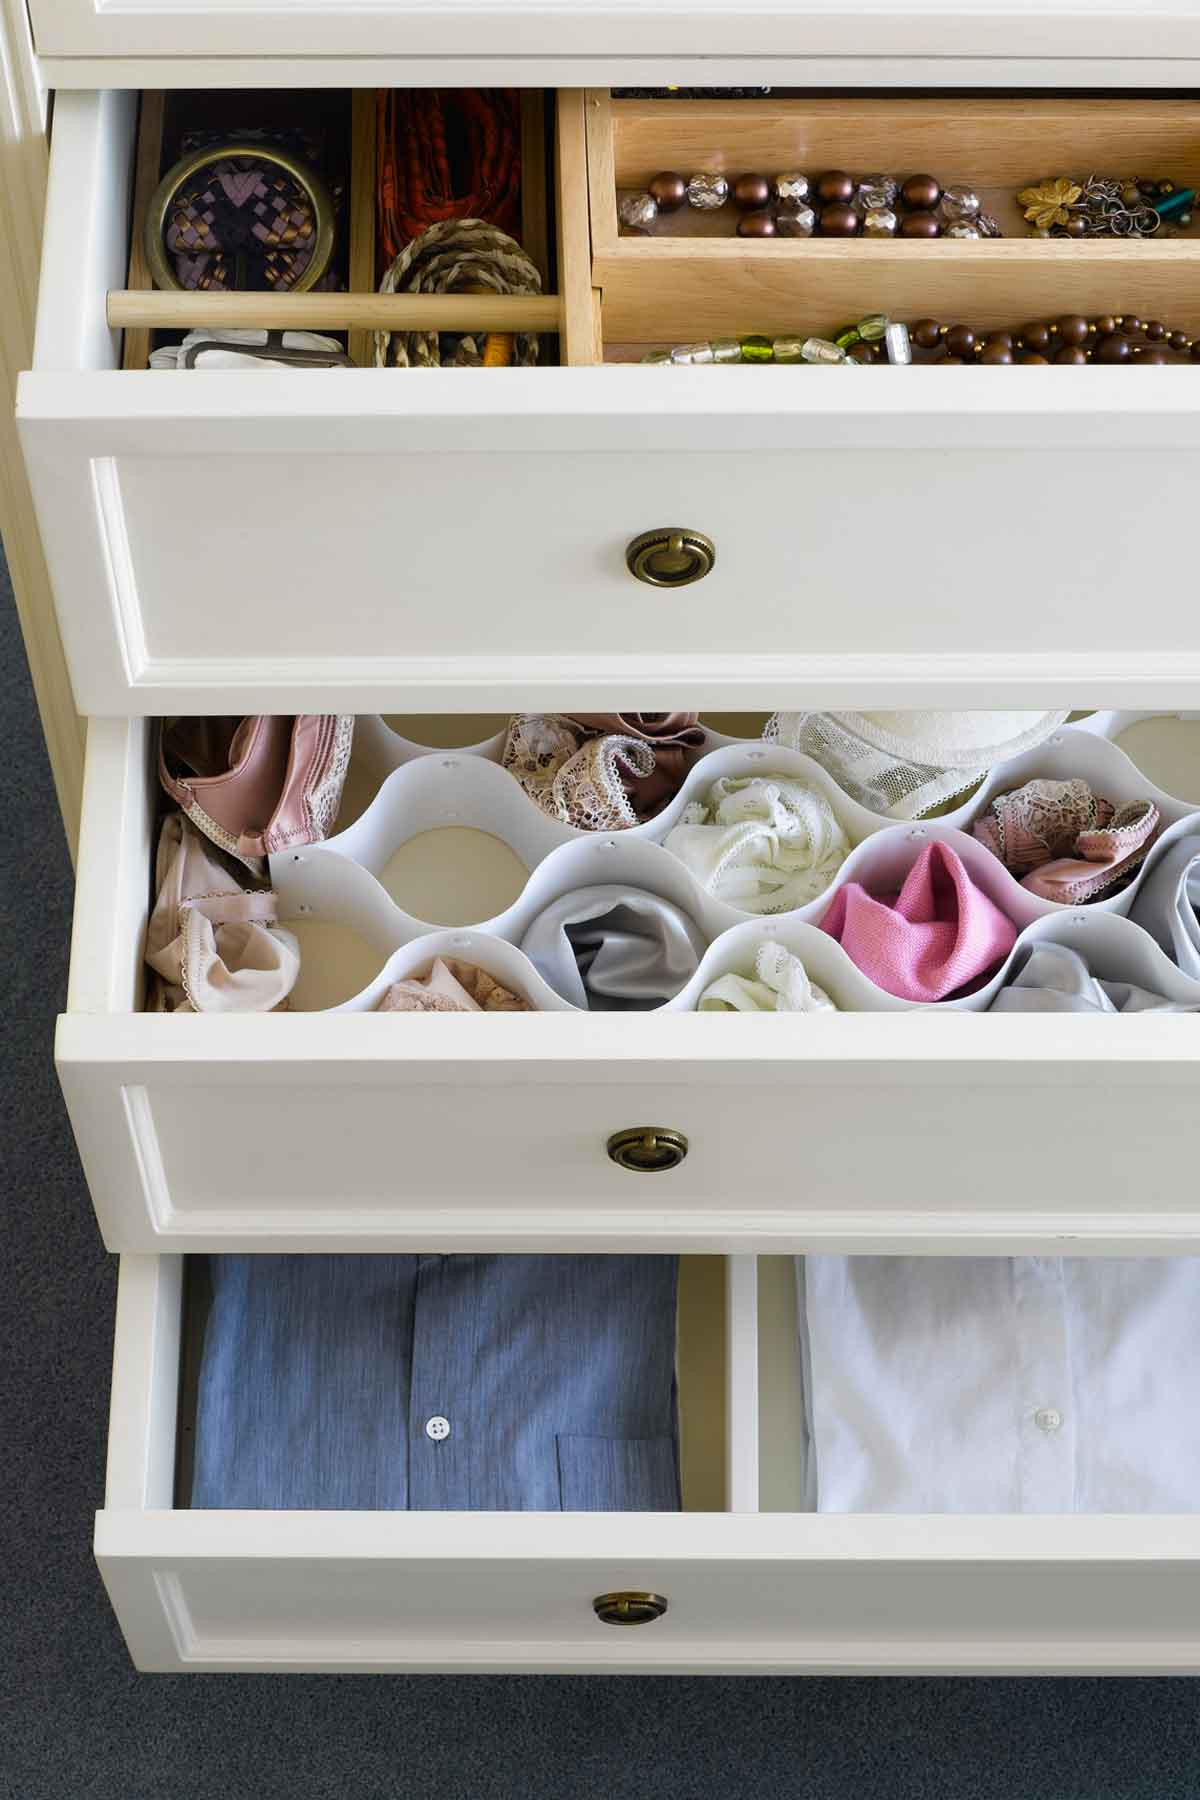 Organization Tips For Bedroom
 How to Organize Your Room 20 Best Bedroom Organization Ideas